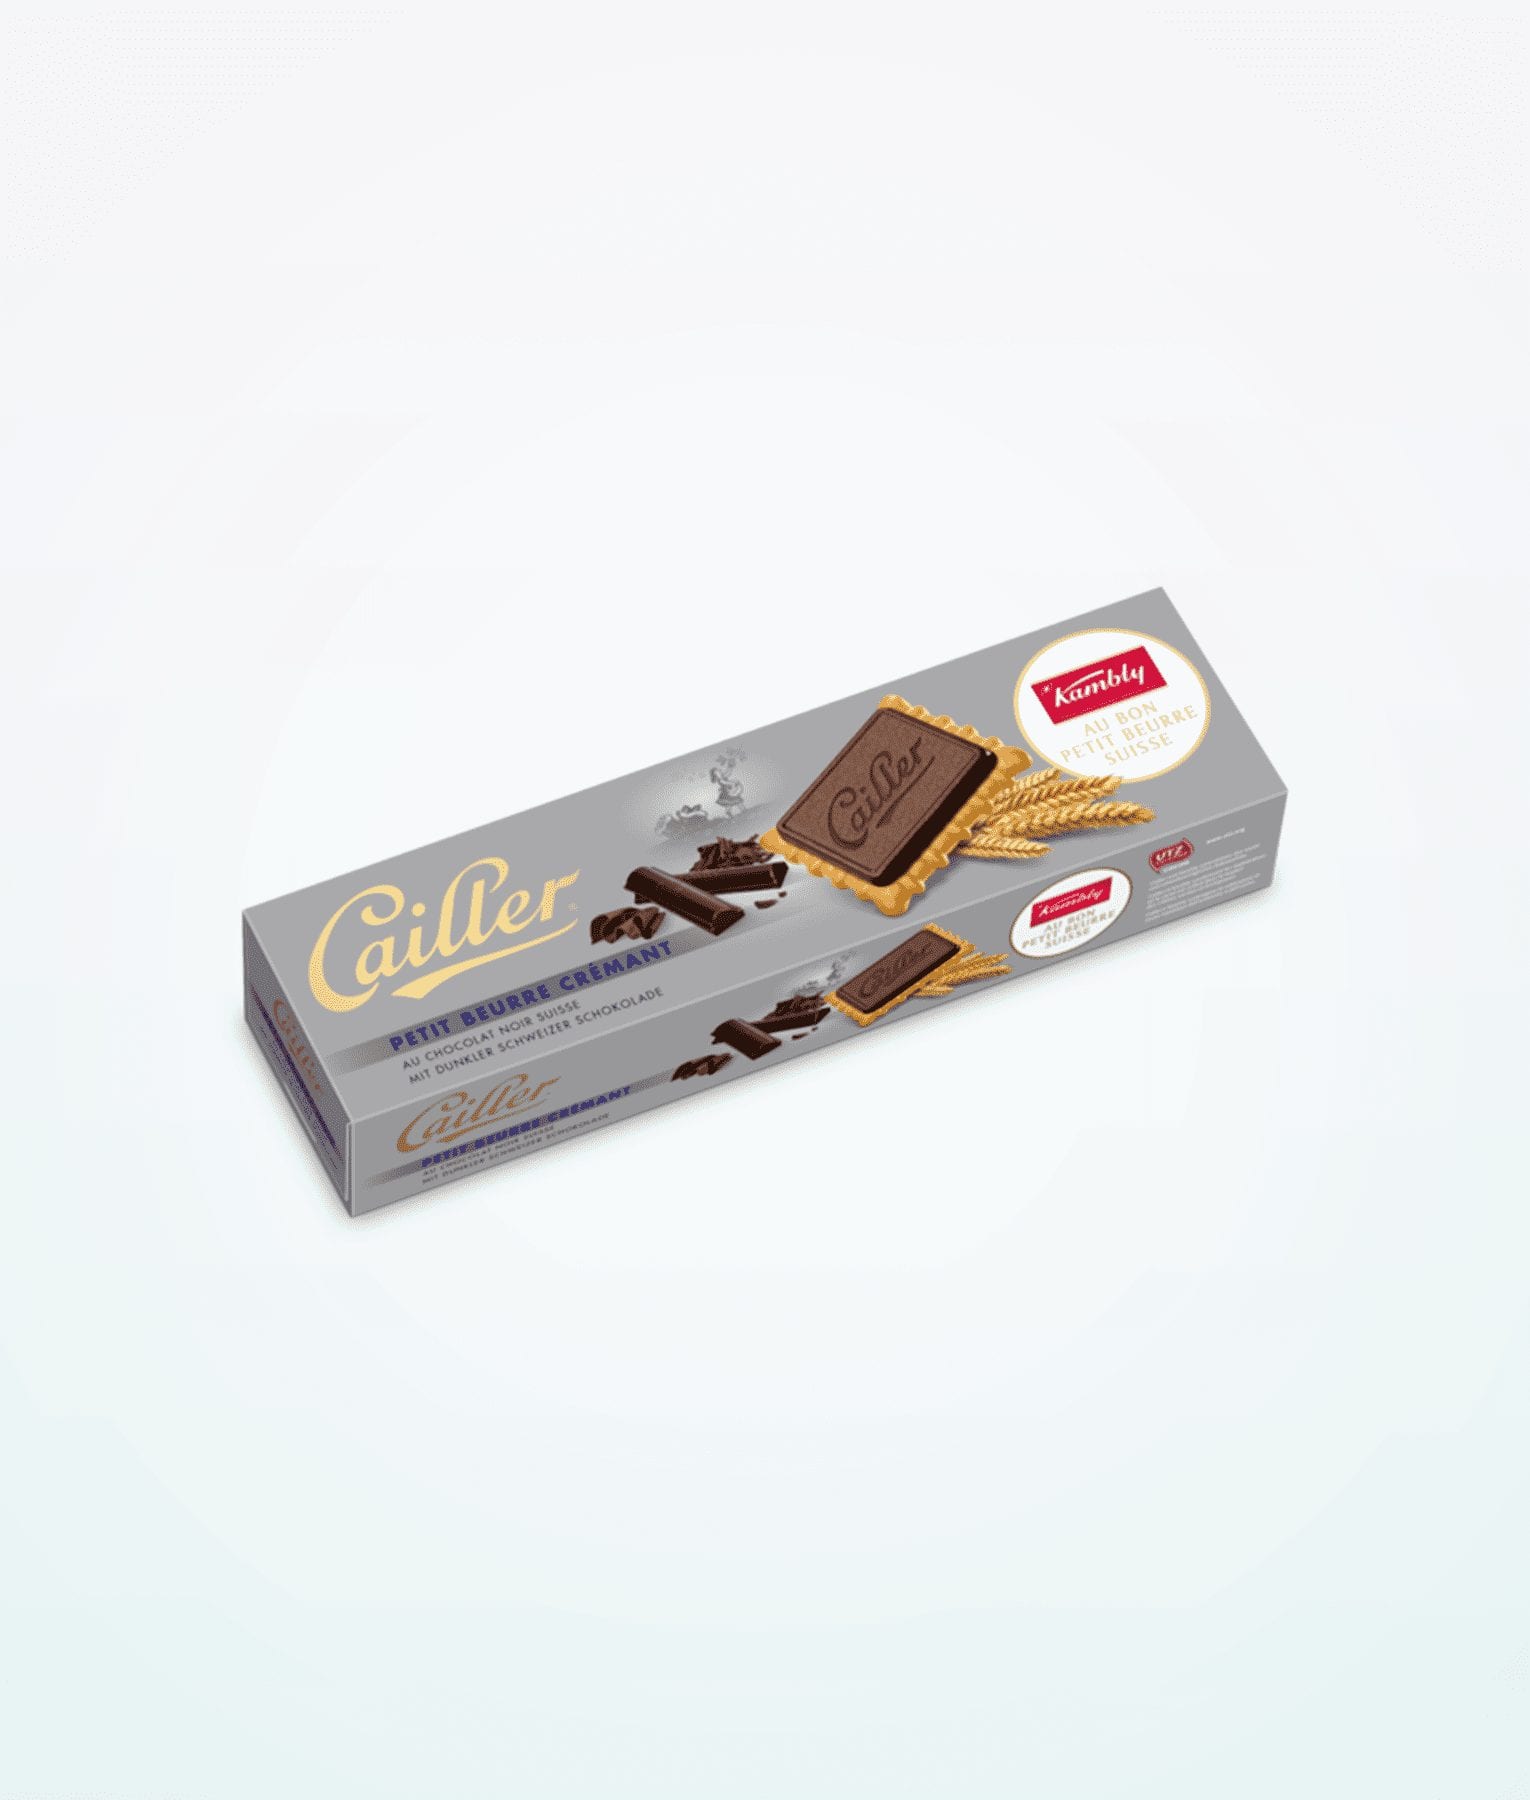 kambly-biscuit-with-cailler-dark-chocolate